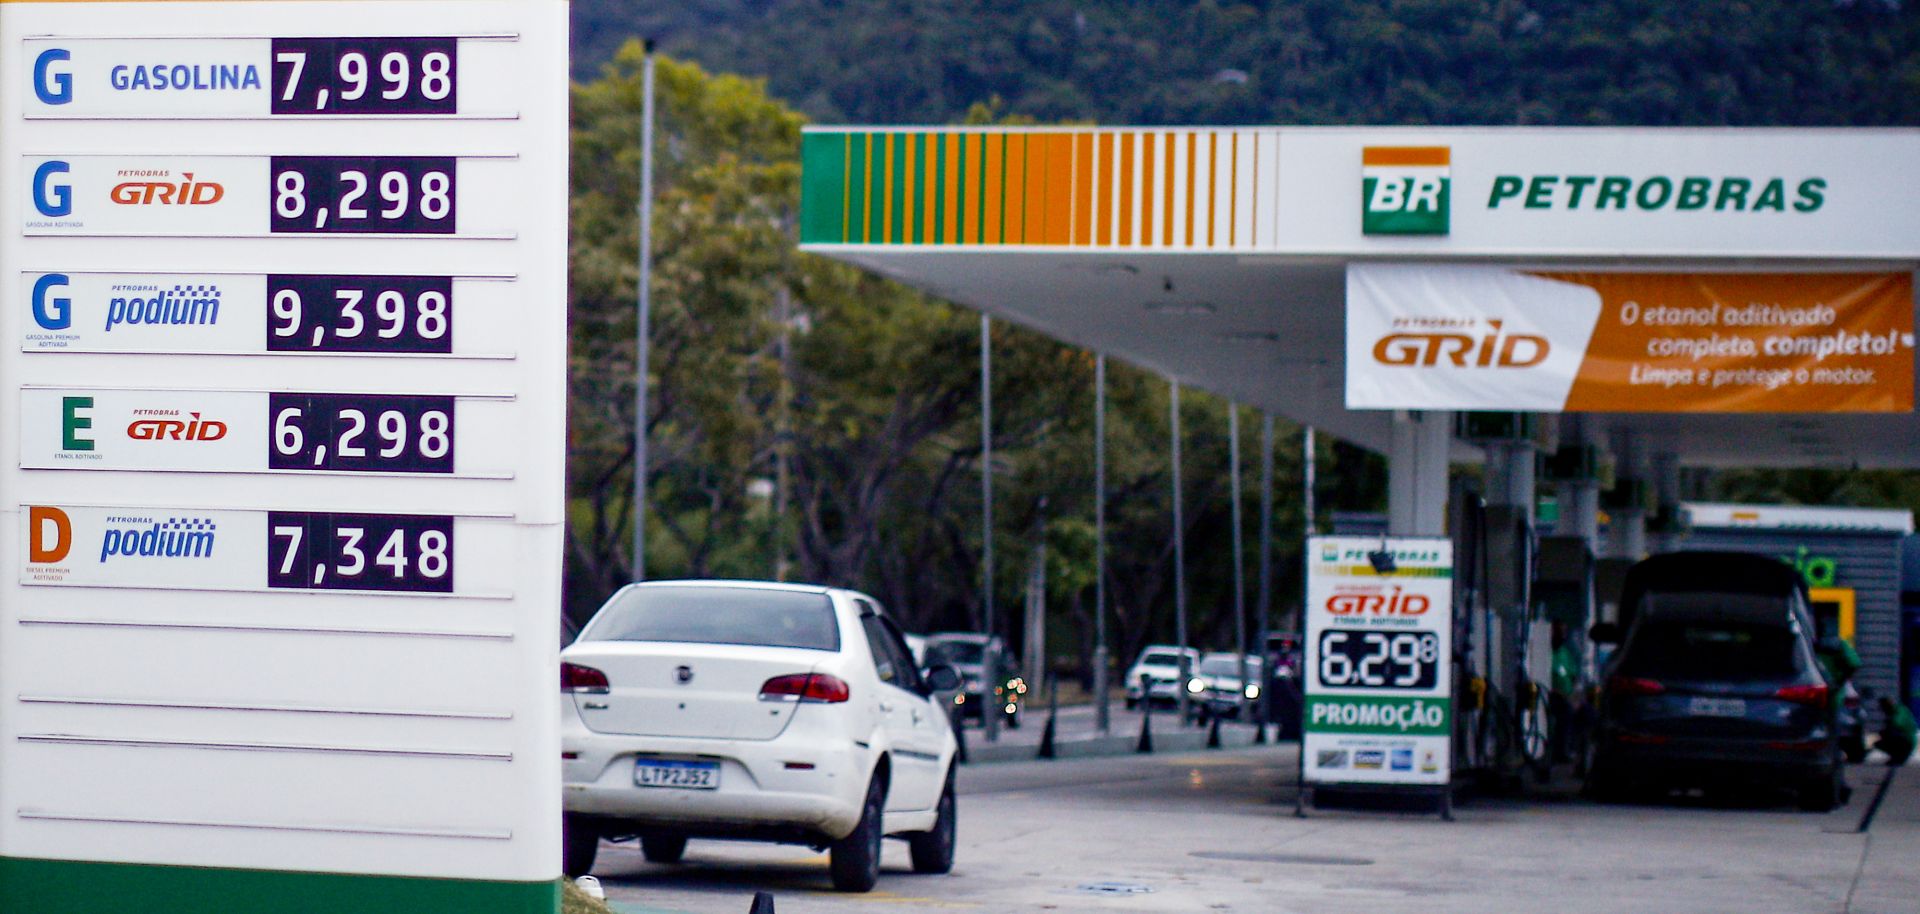 A list of prices is seen at a gas station operated by the Brazilian state-run oil company Petrobras in Rio de Janeiro, Brazil, on March 12, 2022. Petrobras announced fuel price increases due to the Russia-Ukraine conflict, which has spiked global crude prices. 